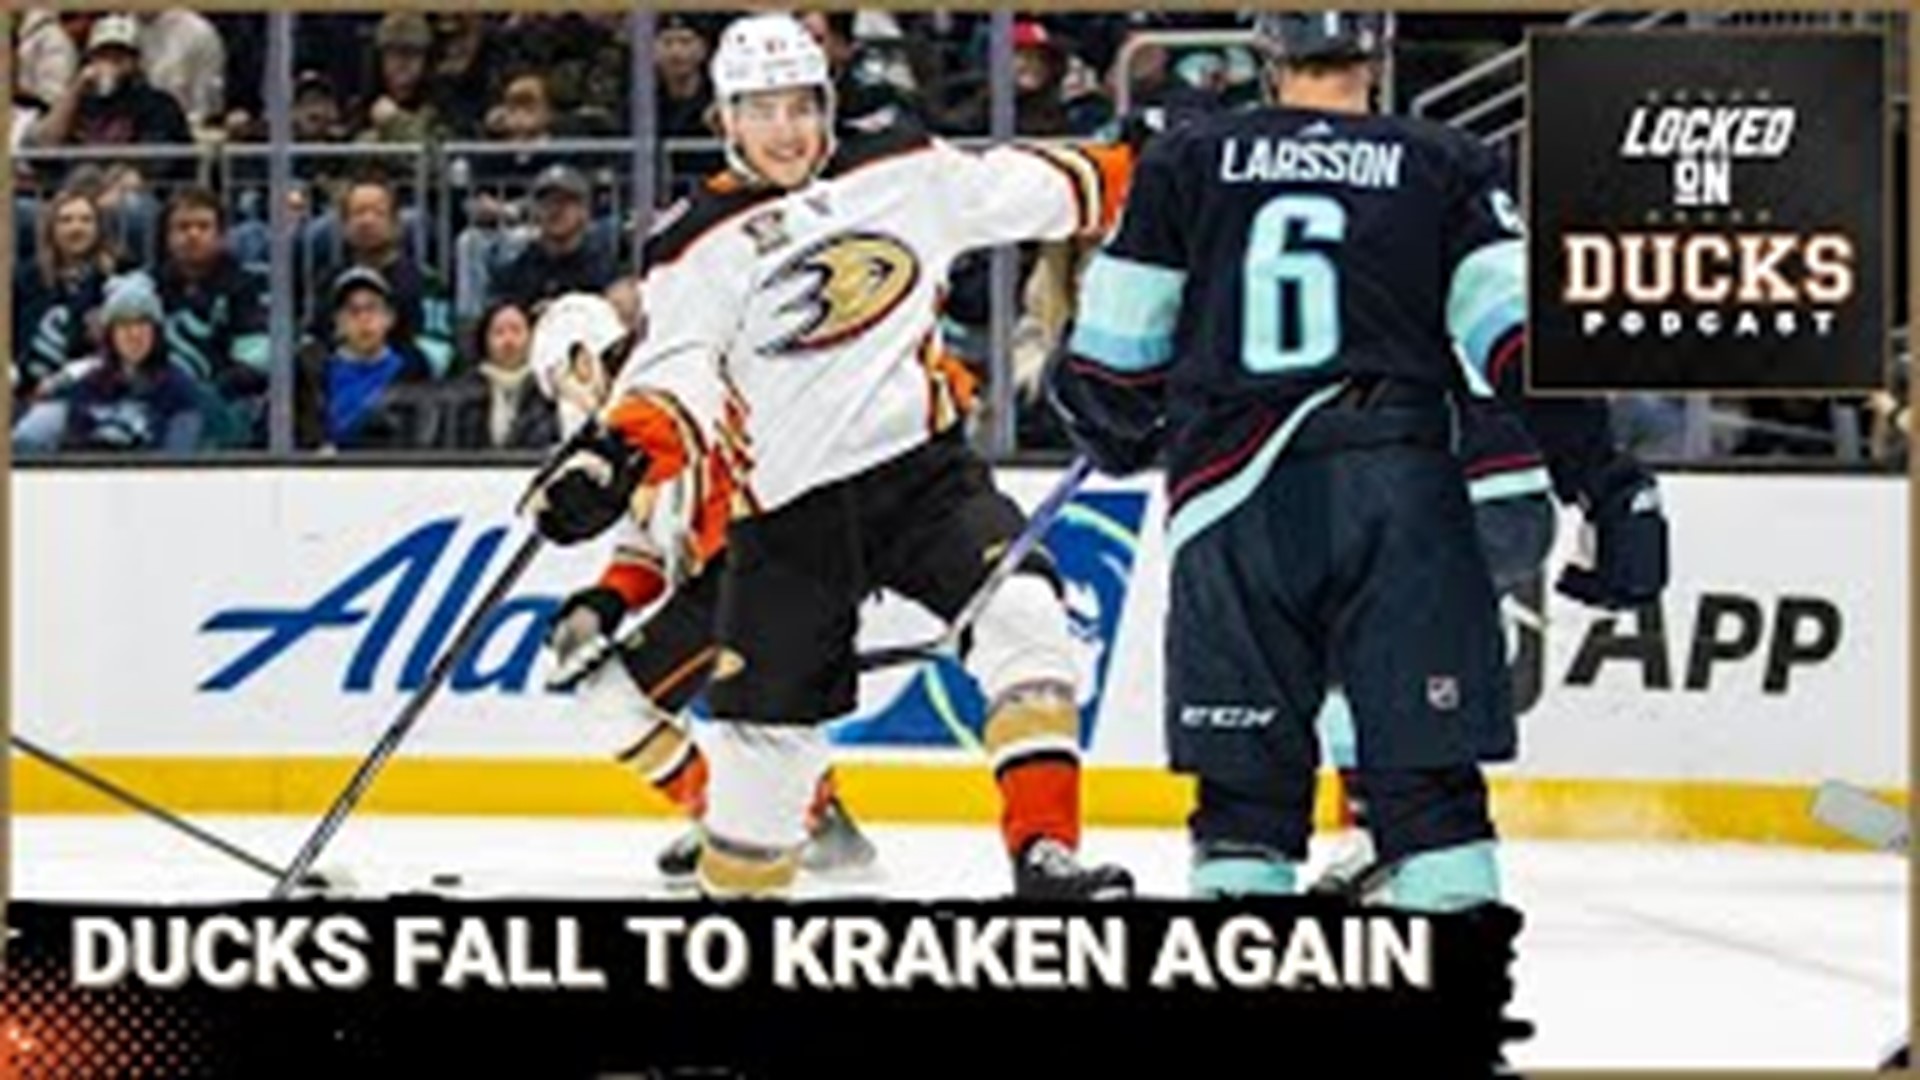 The Anaheim Ducks lose again to the Seattle Kraken. In fact, Seattle sweeps the season series in SoCal. JD Hernandez wraps up the week talking about Leo Carlsson.